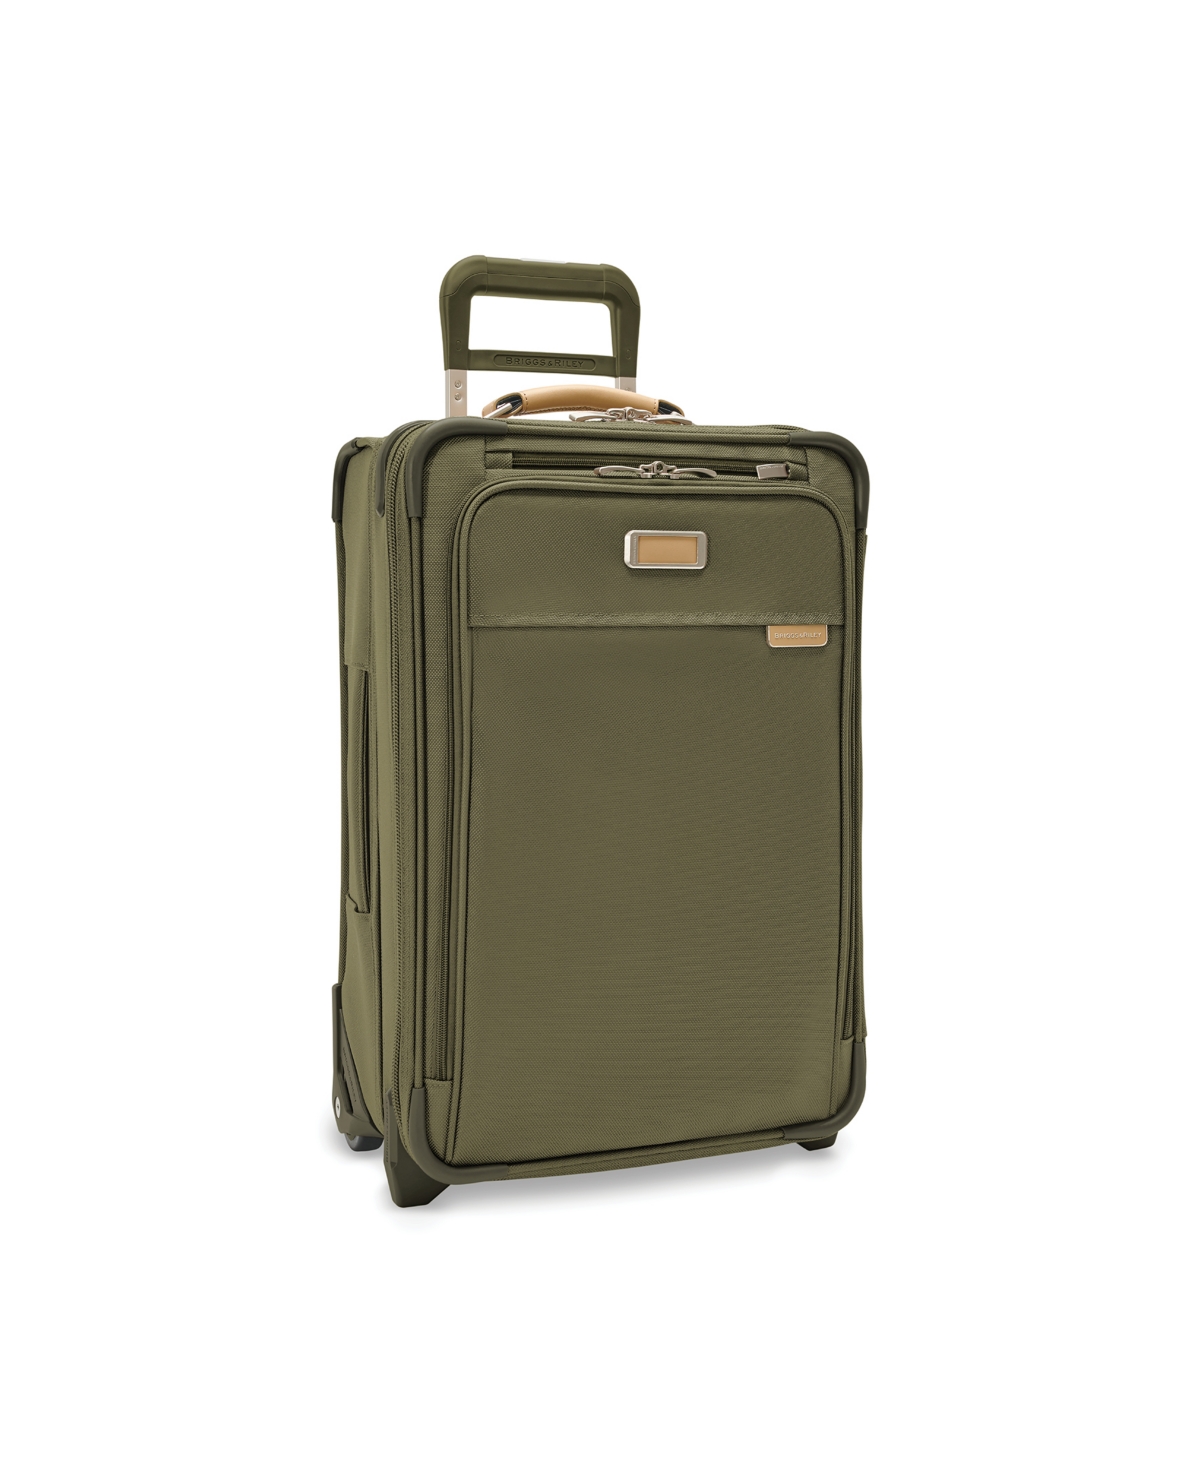 Baseline Essential 2-Wheel Carry-On - Olive